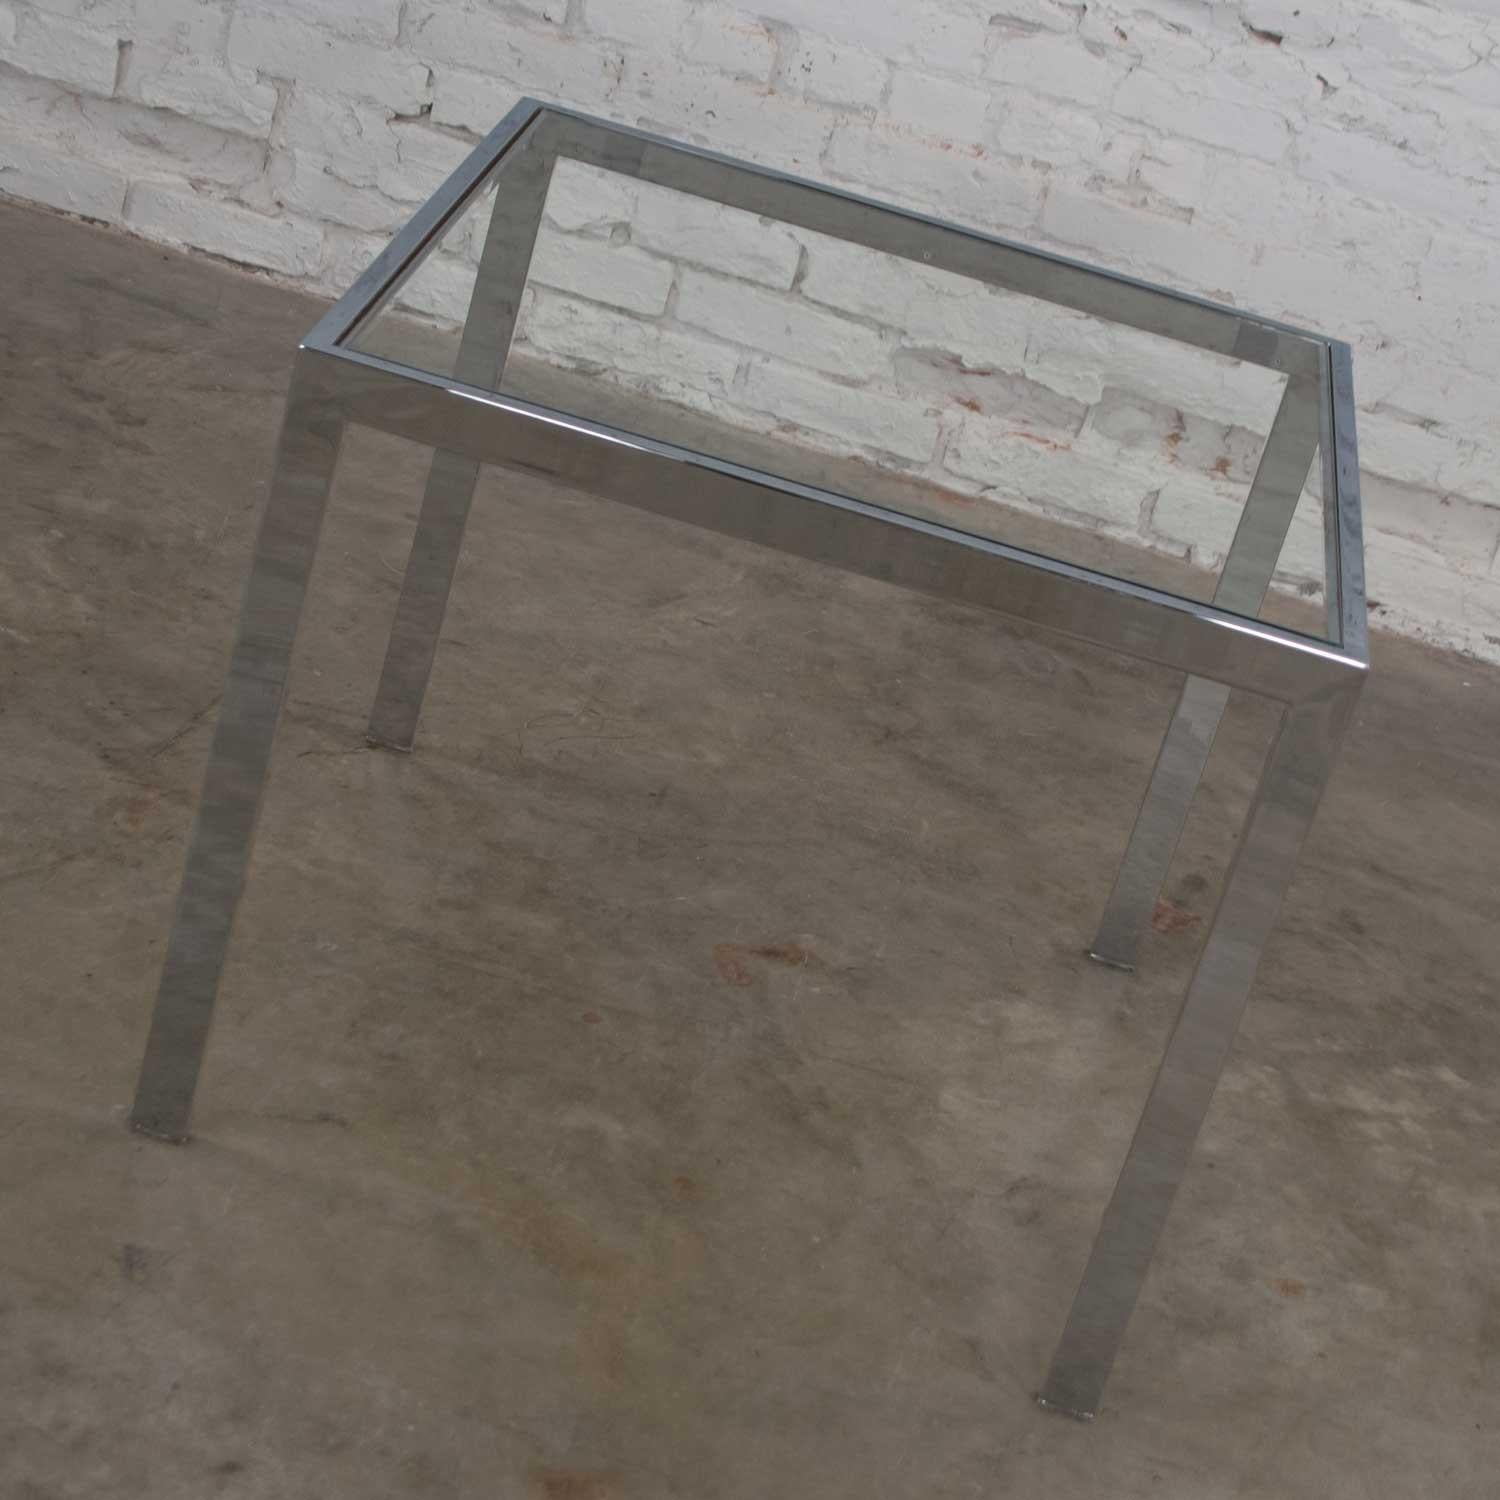 Handsome Mid-Century Modern chrome and glass square Parsons style end table or side table after similar designs of Milo Baughman. It is in wonderful vintage condition. The chrome tube frame does not show any outstanding flaws but there is a bit of